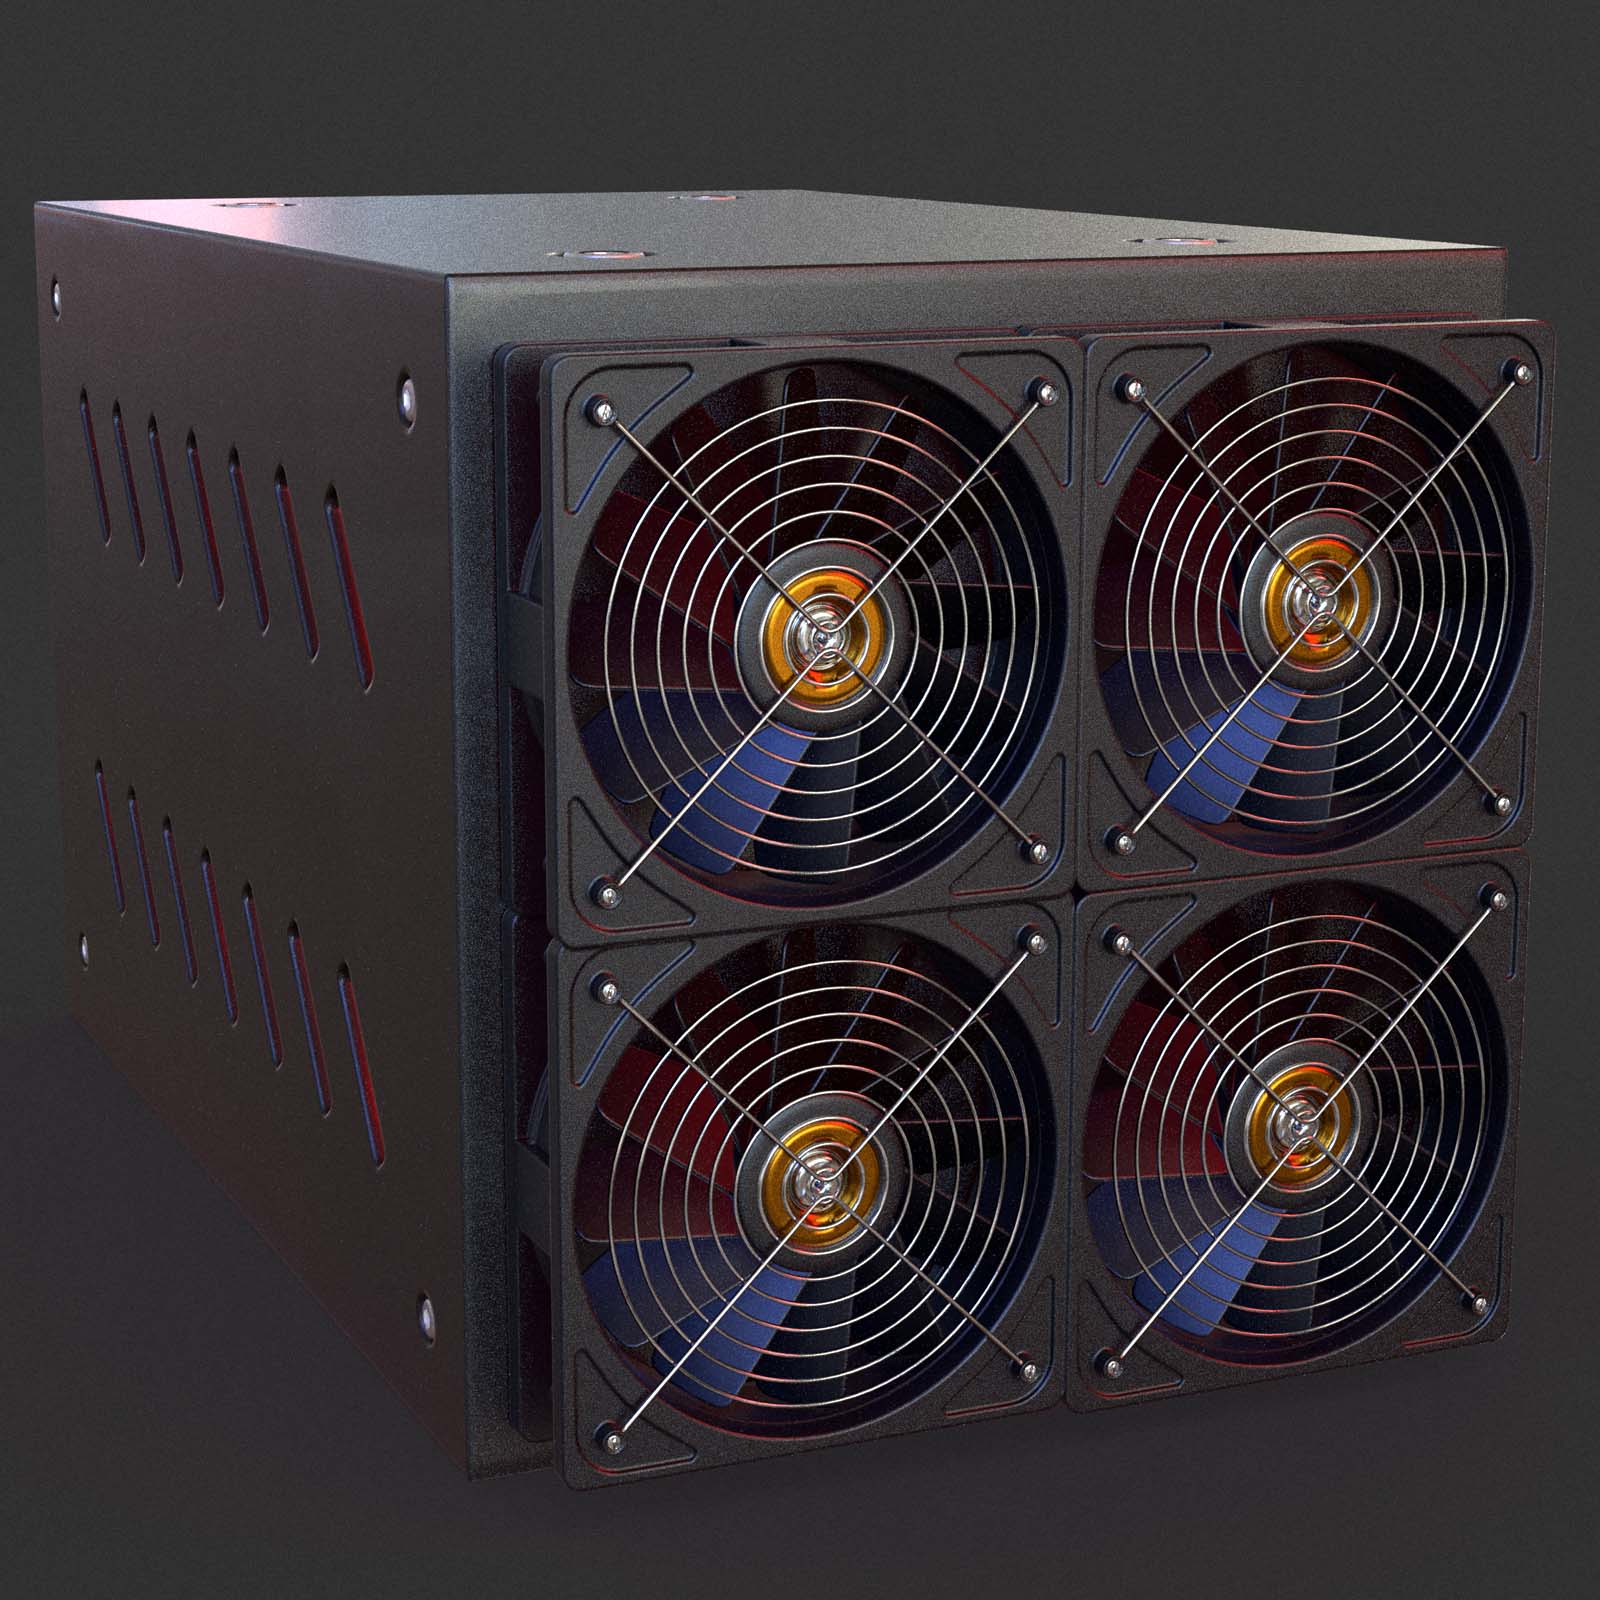 German Startup Comes up With Eco-Friendly, Energy-Efficient Miners